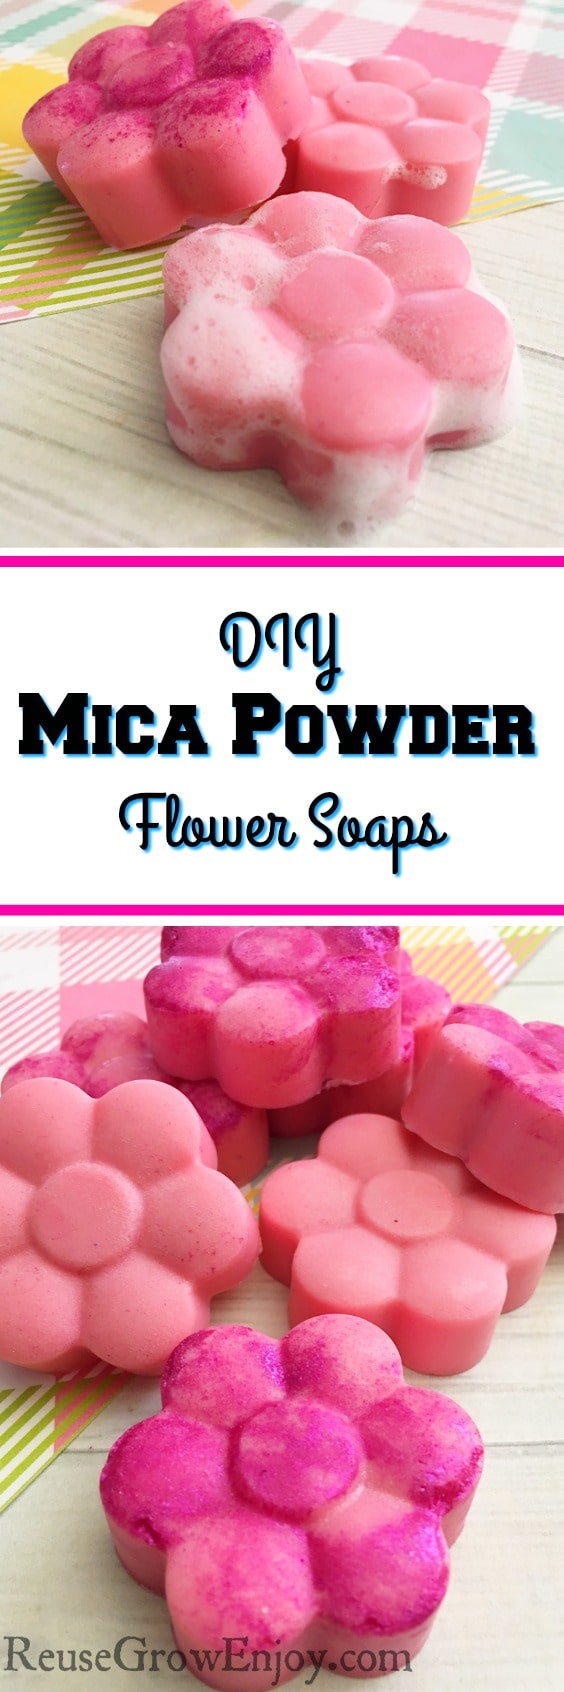 Mica Powder Soap Making - Flower Soaps With Natural Color Option - Reuse  Grow Enjoy